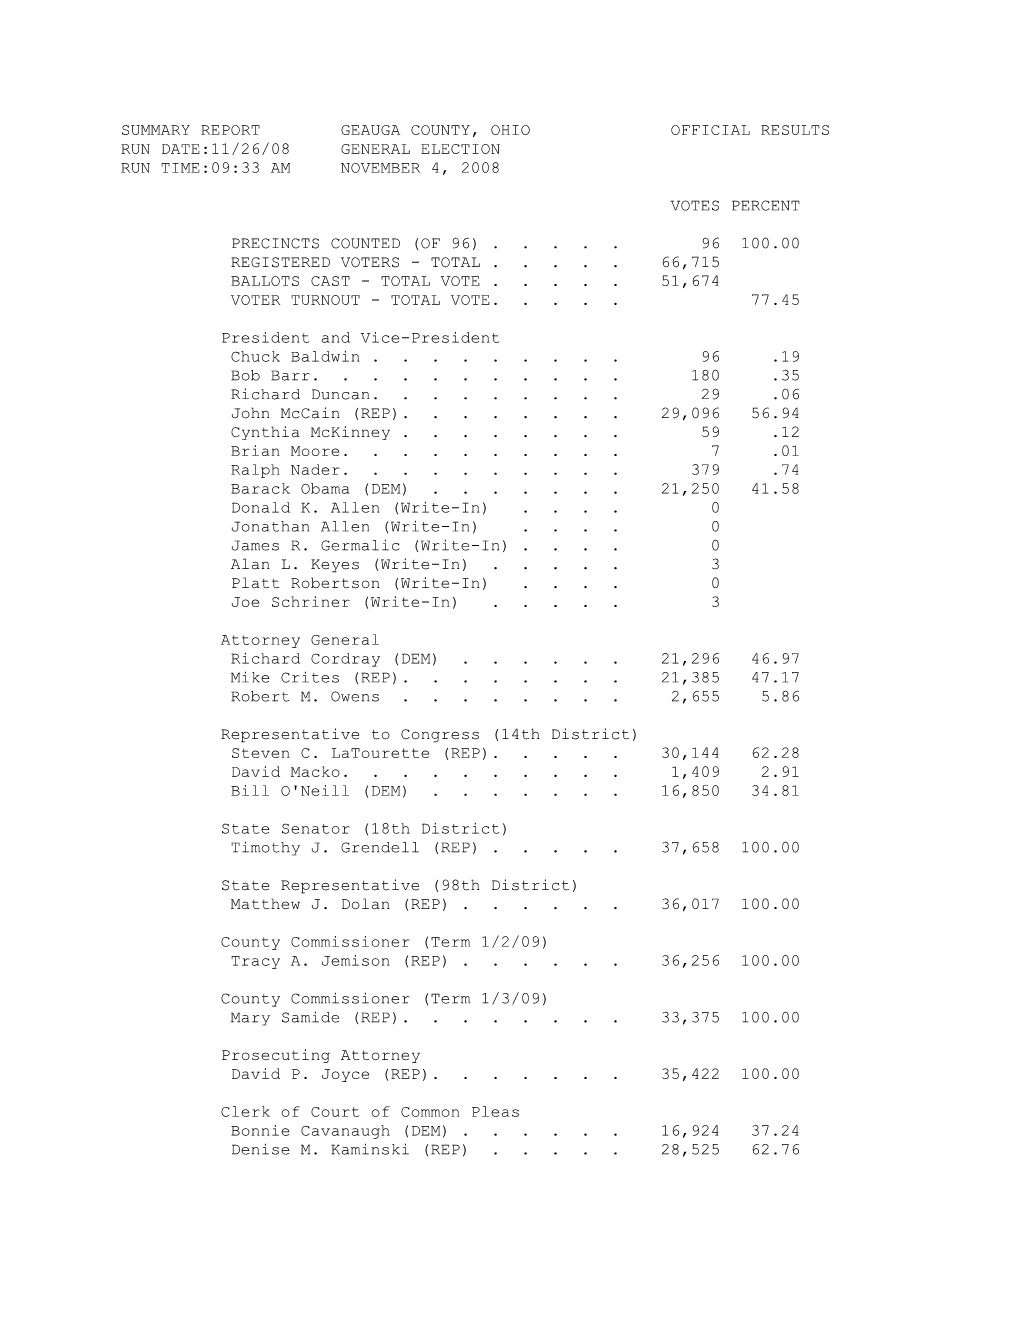 November 4, 2008 General Election Official Results